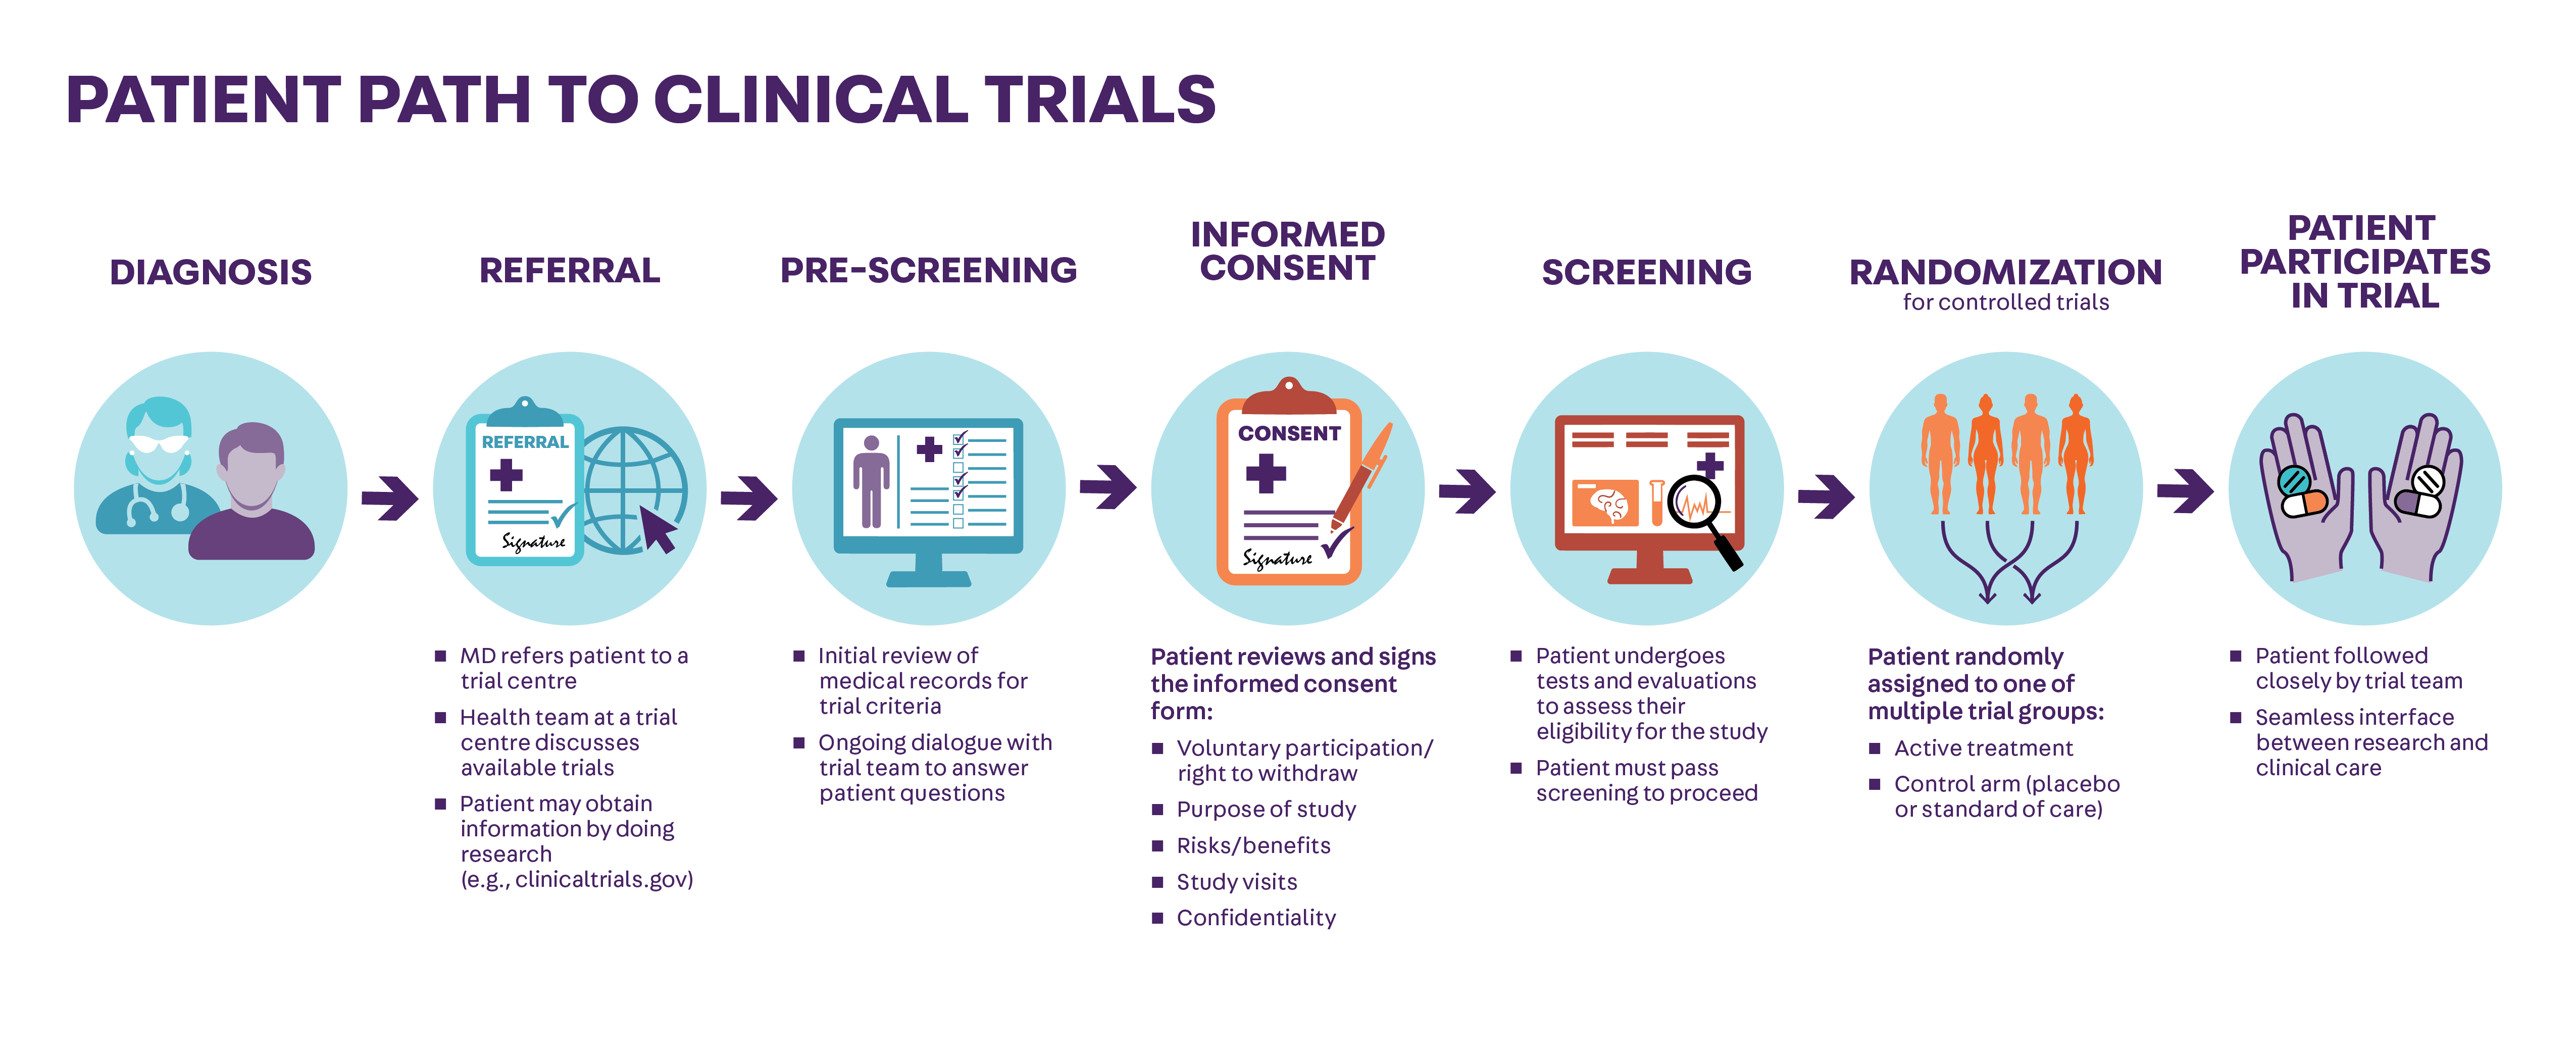 Clinical trial patient pathway